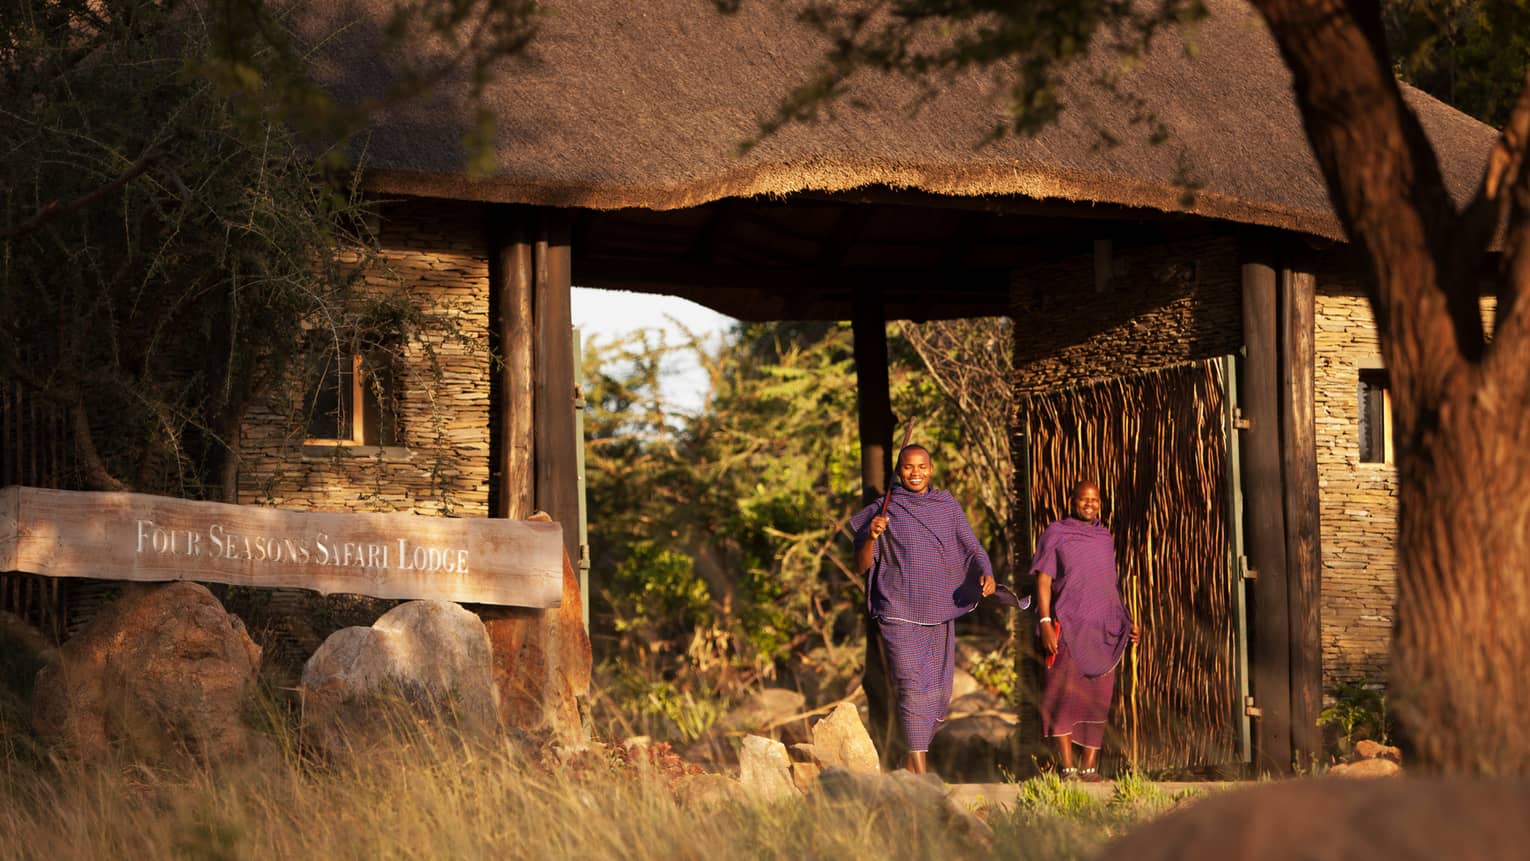 Two people from local Maasai smile, stand by Four Seasons Safari Lodge Serengeti sign